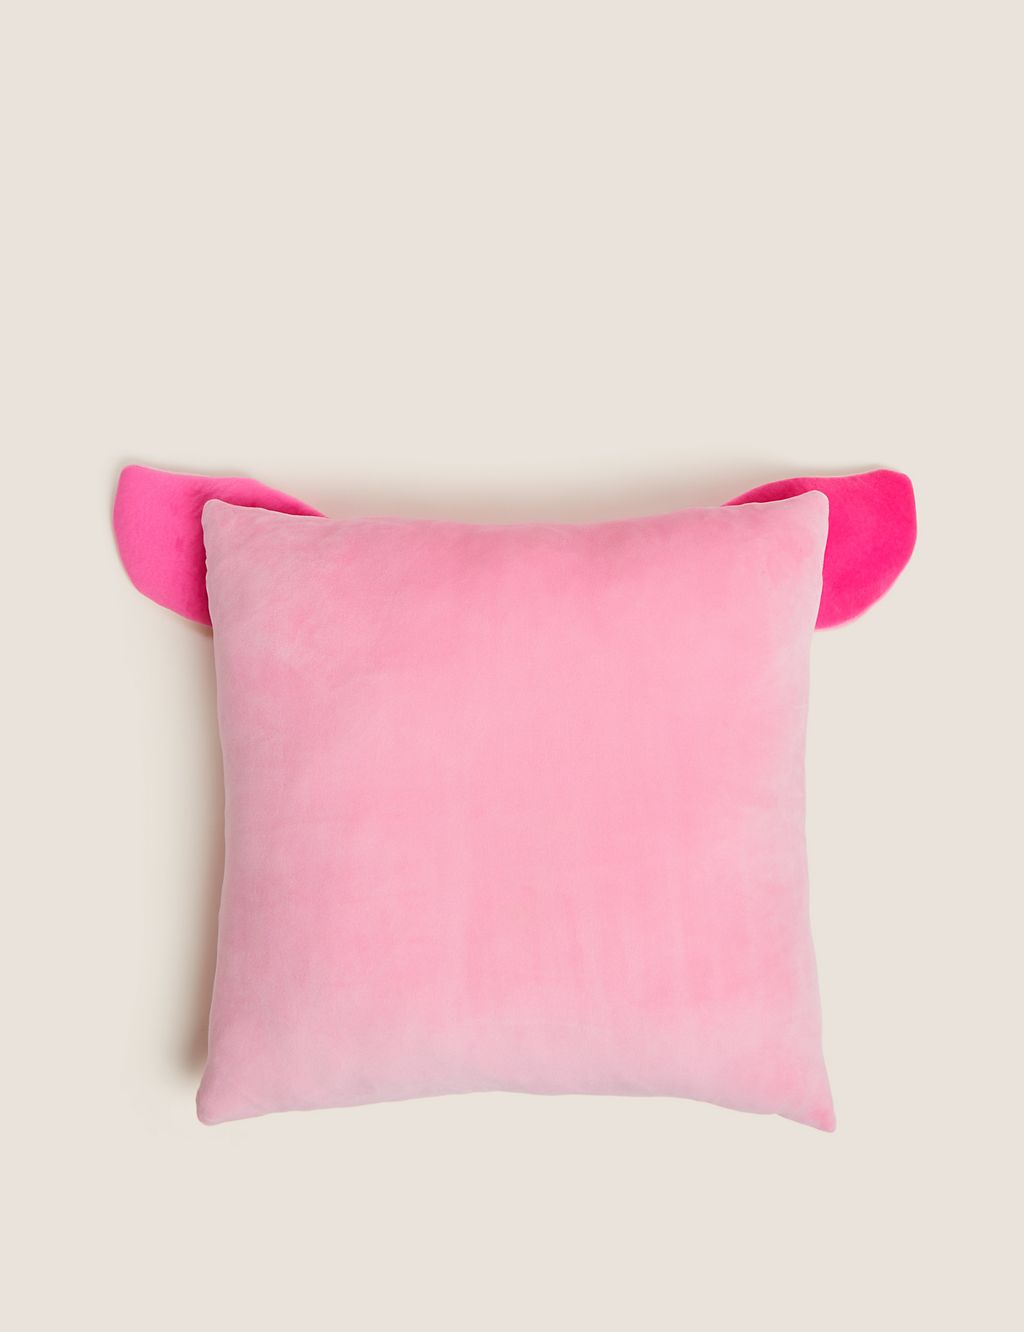 Percy Pig™ Cushion 7 of 8